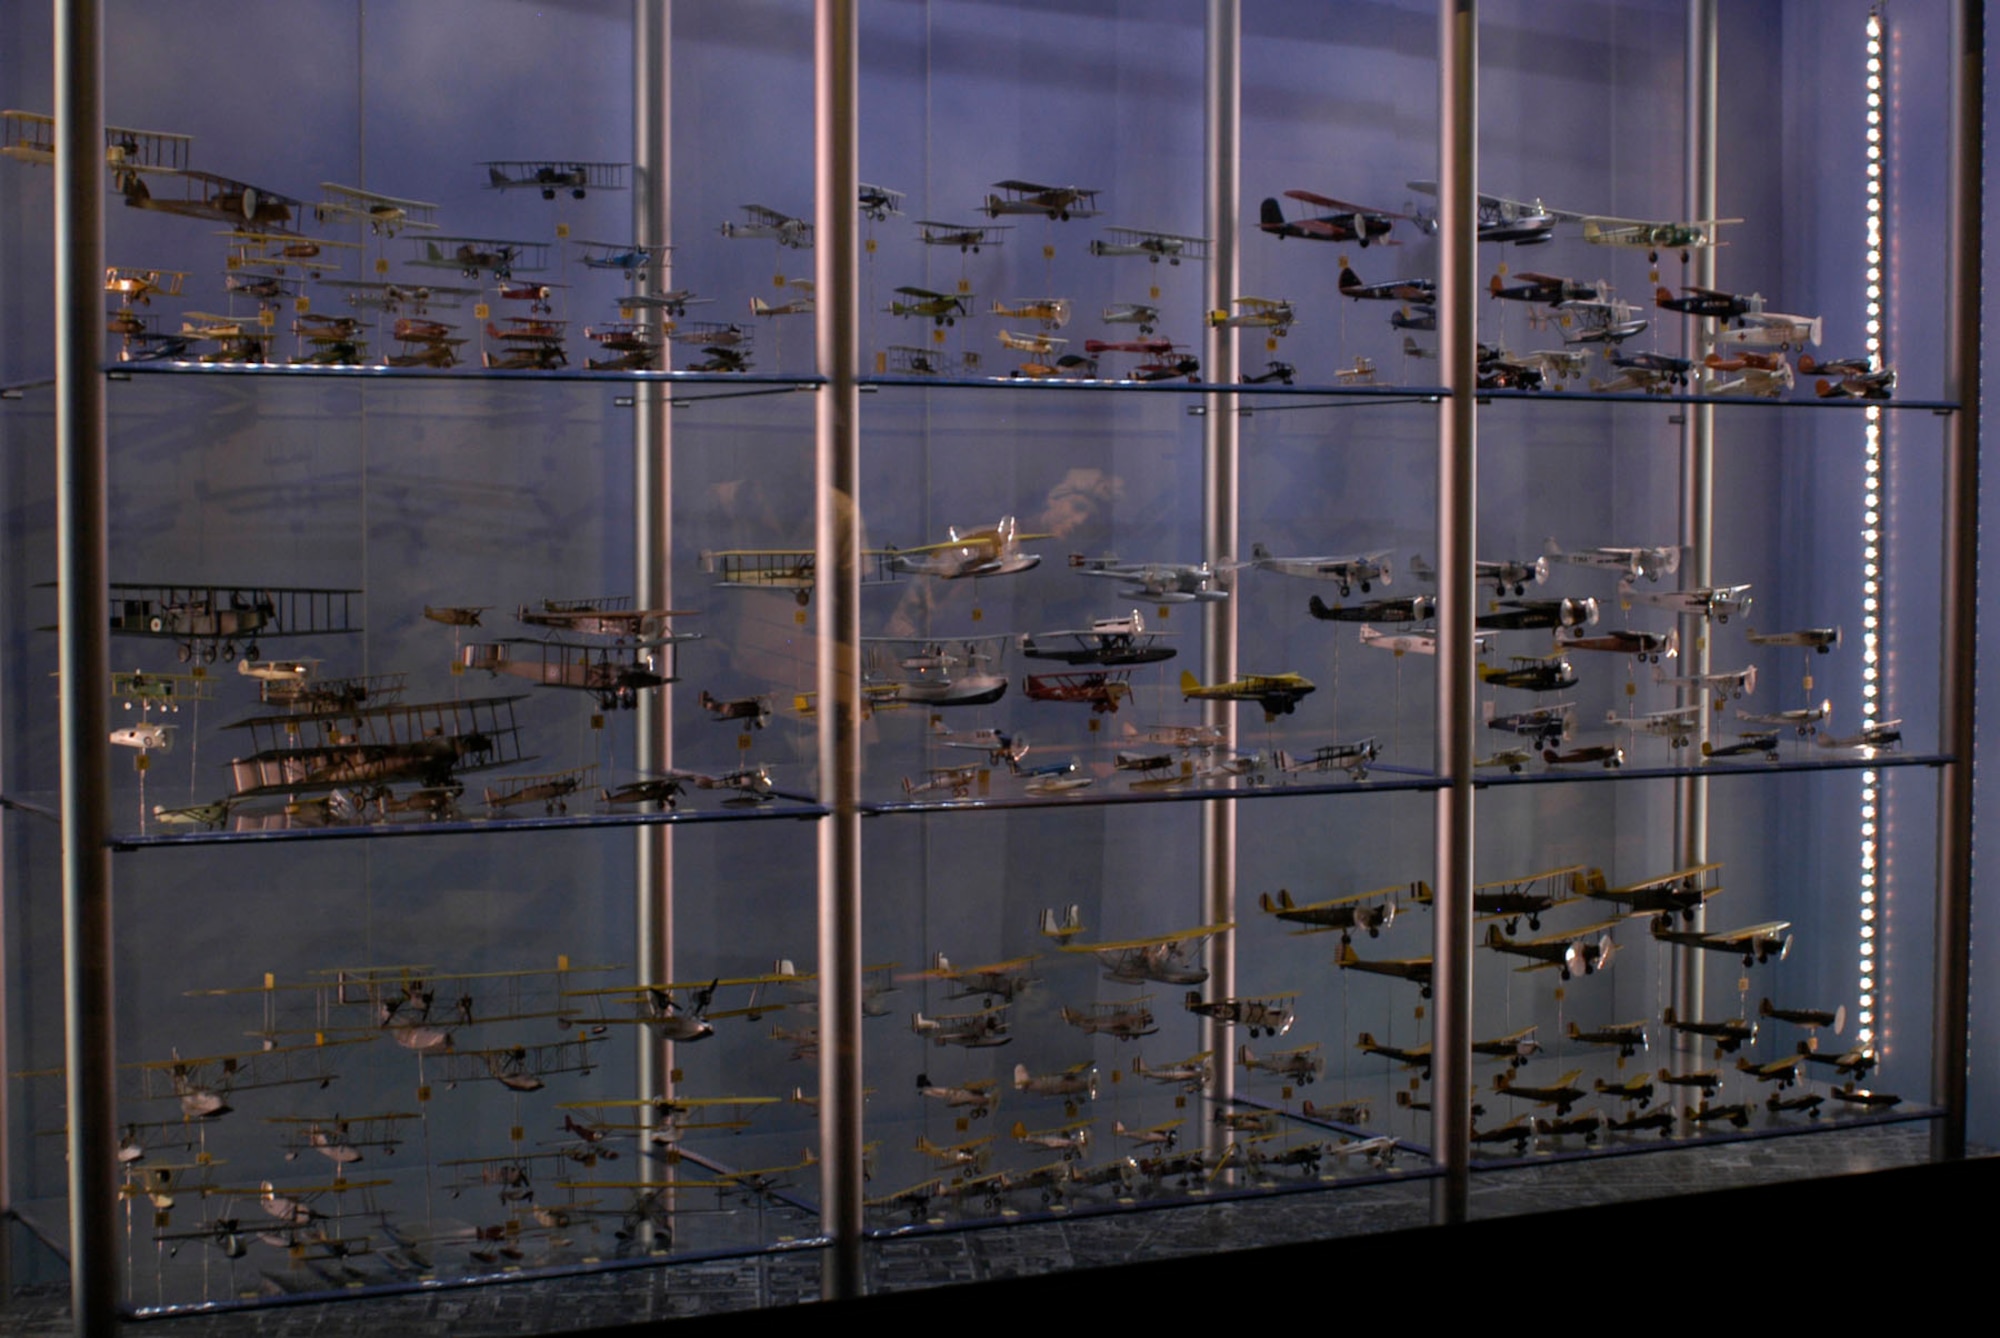 DAYTON, Ohio - Models from the Eugene W. Kettering Model Aircraft Collection on display at the National Museum of the U.S. Air Force. (U.S. Air Force photo)